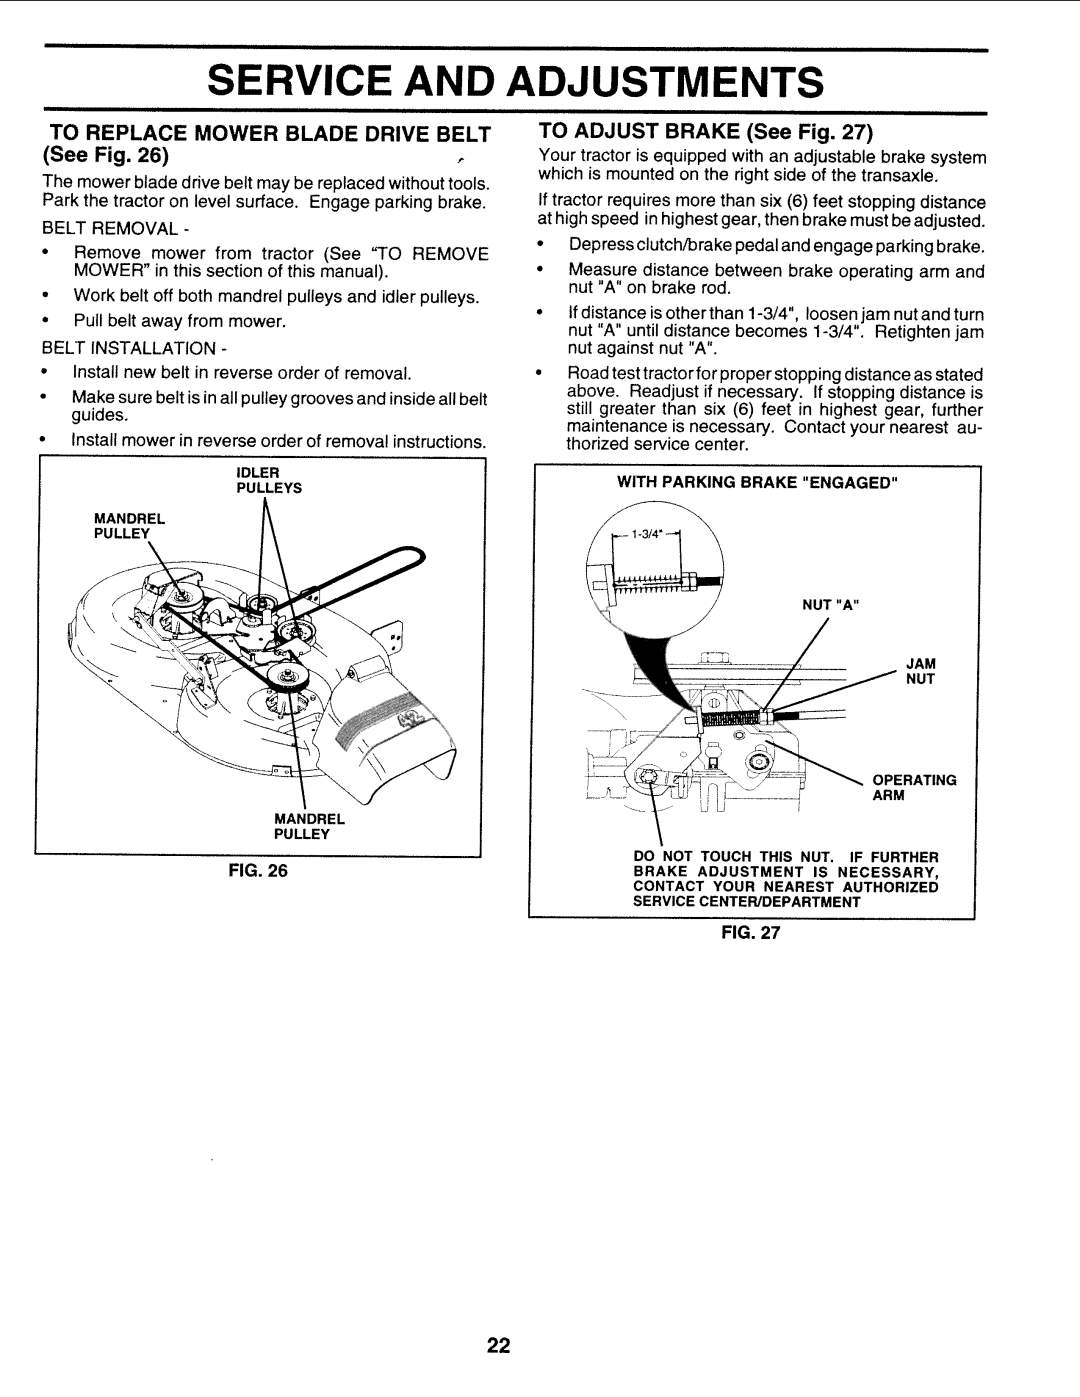 Sears 917.25271 owner manual Service And, Adjustments, TO REPLACE MOWER BLADE DRIVE BELT See Fig, TO ADJUST BRAKE See Fig 